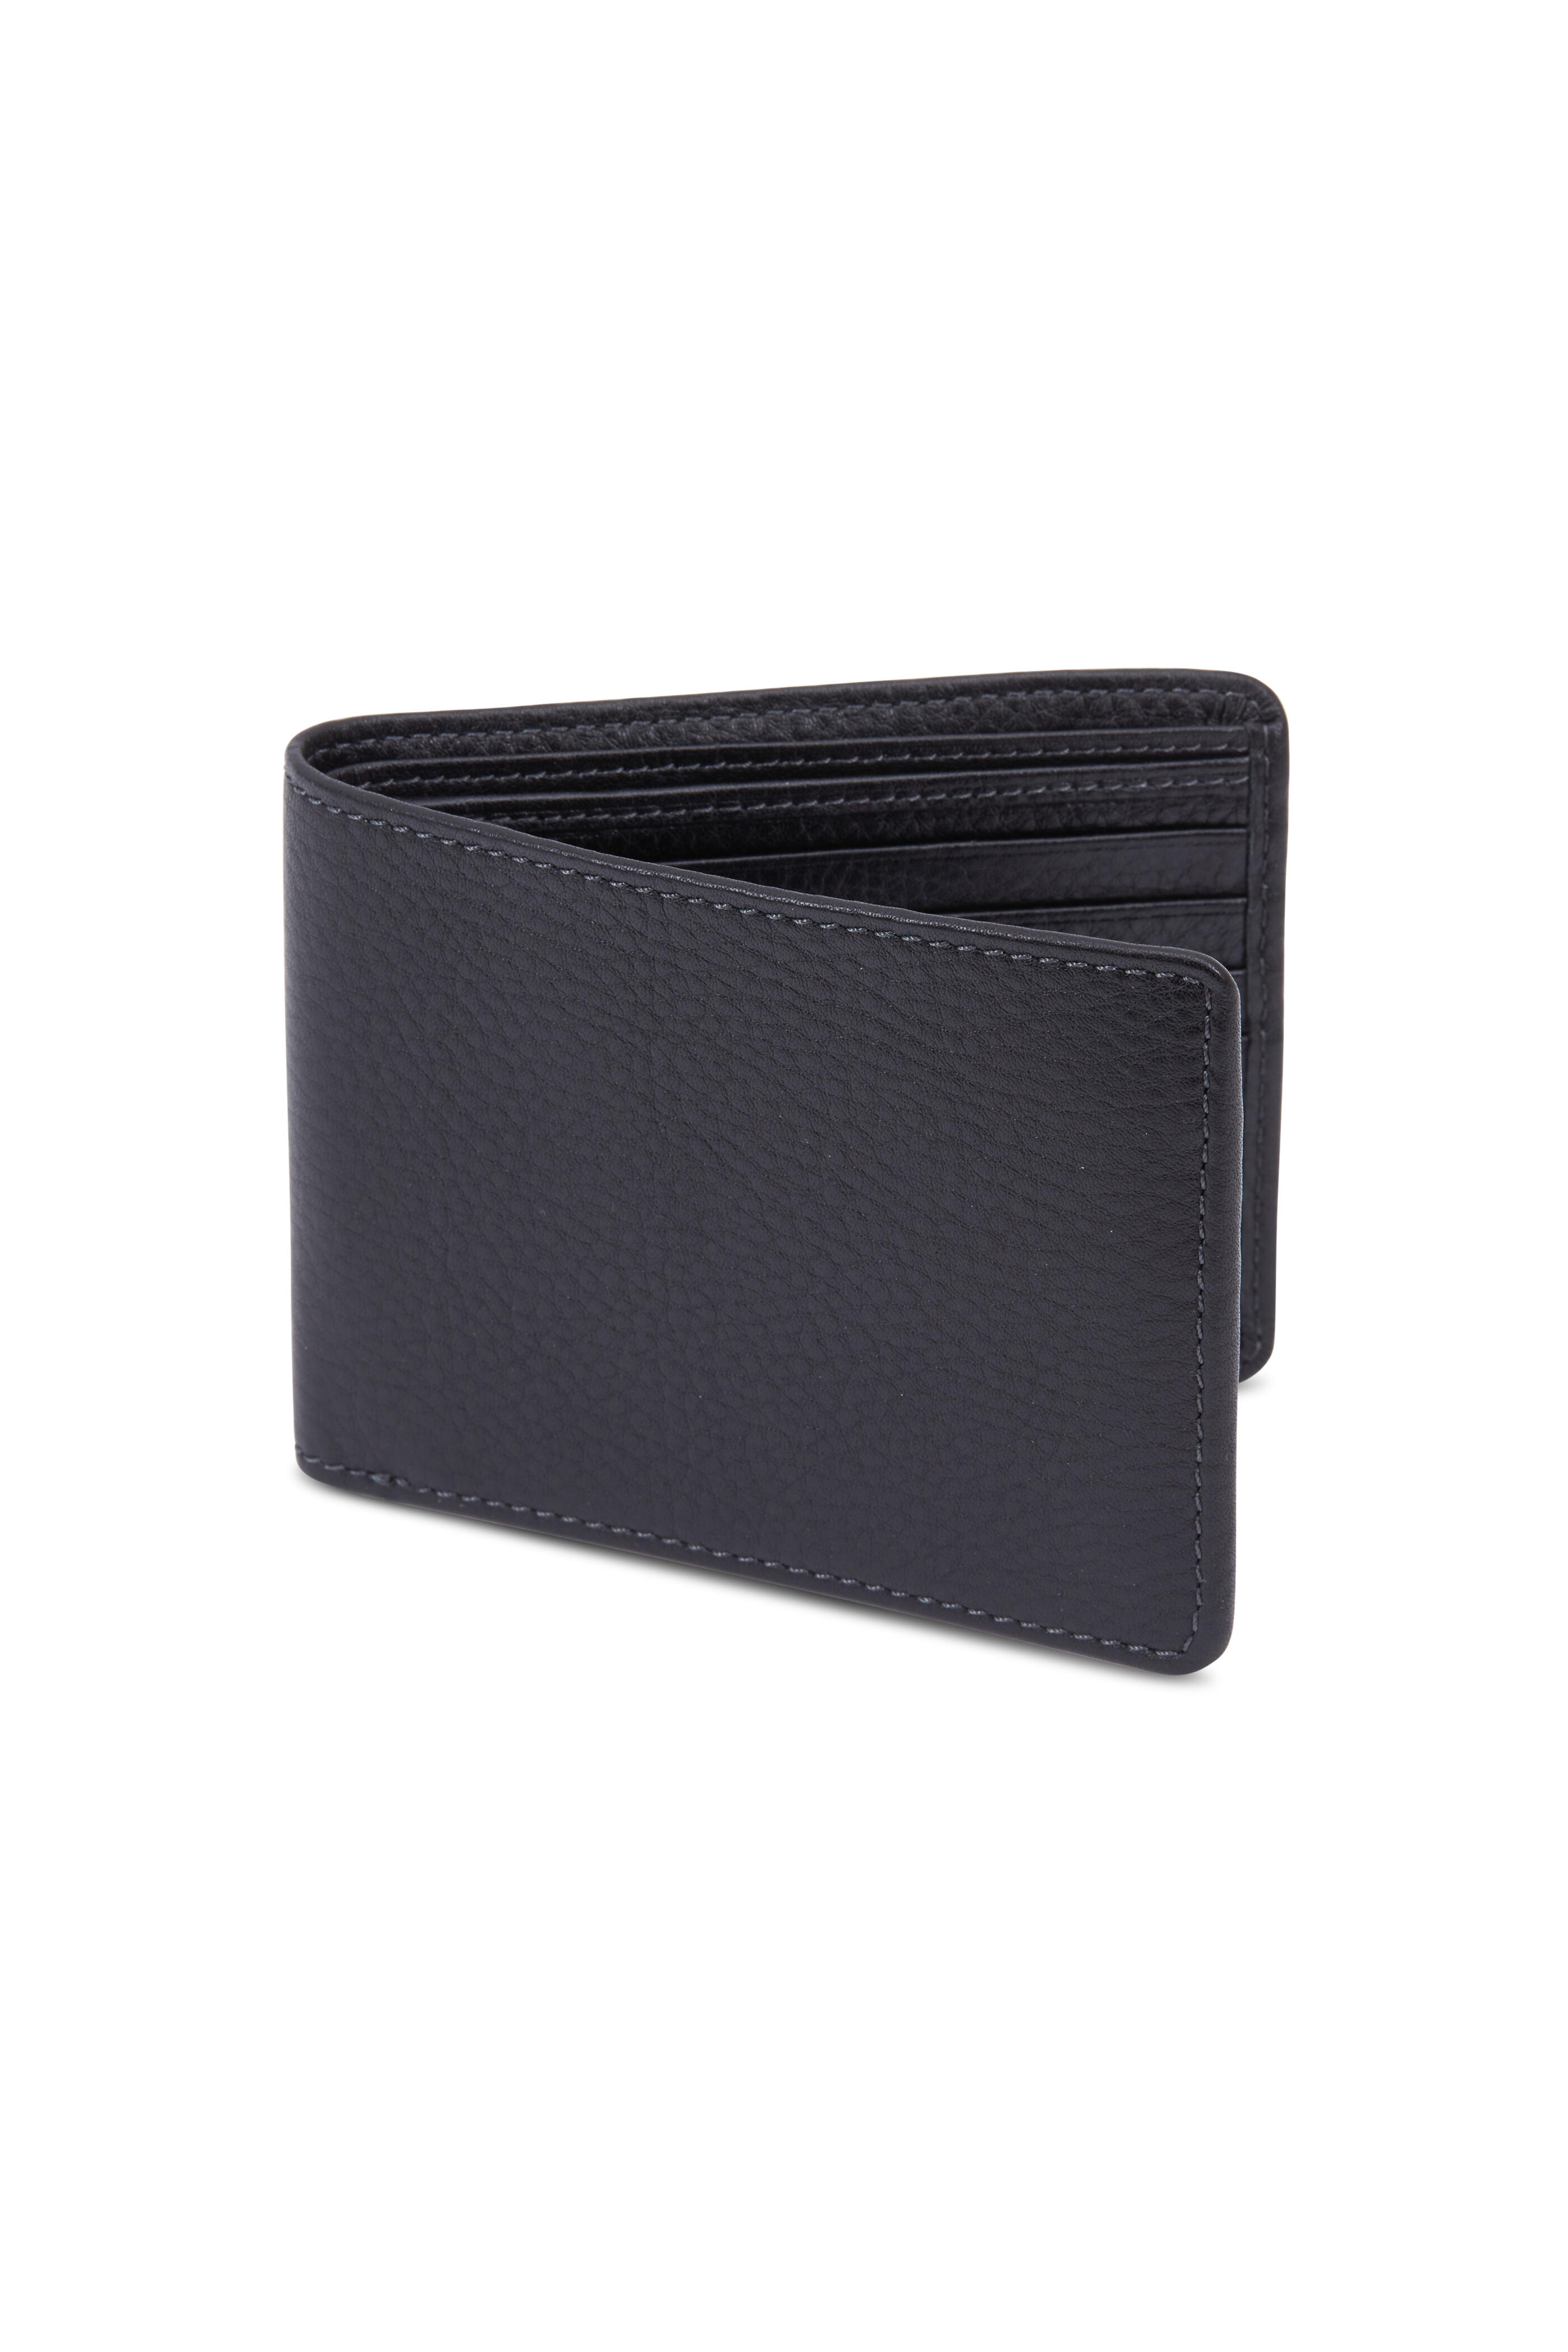 Bosca Continental Bifold Leather Wallet